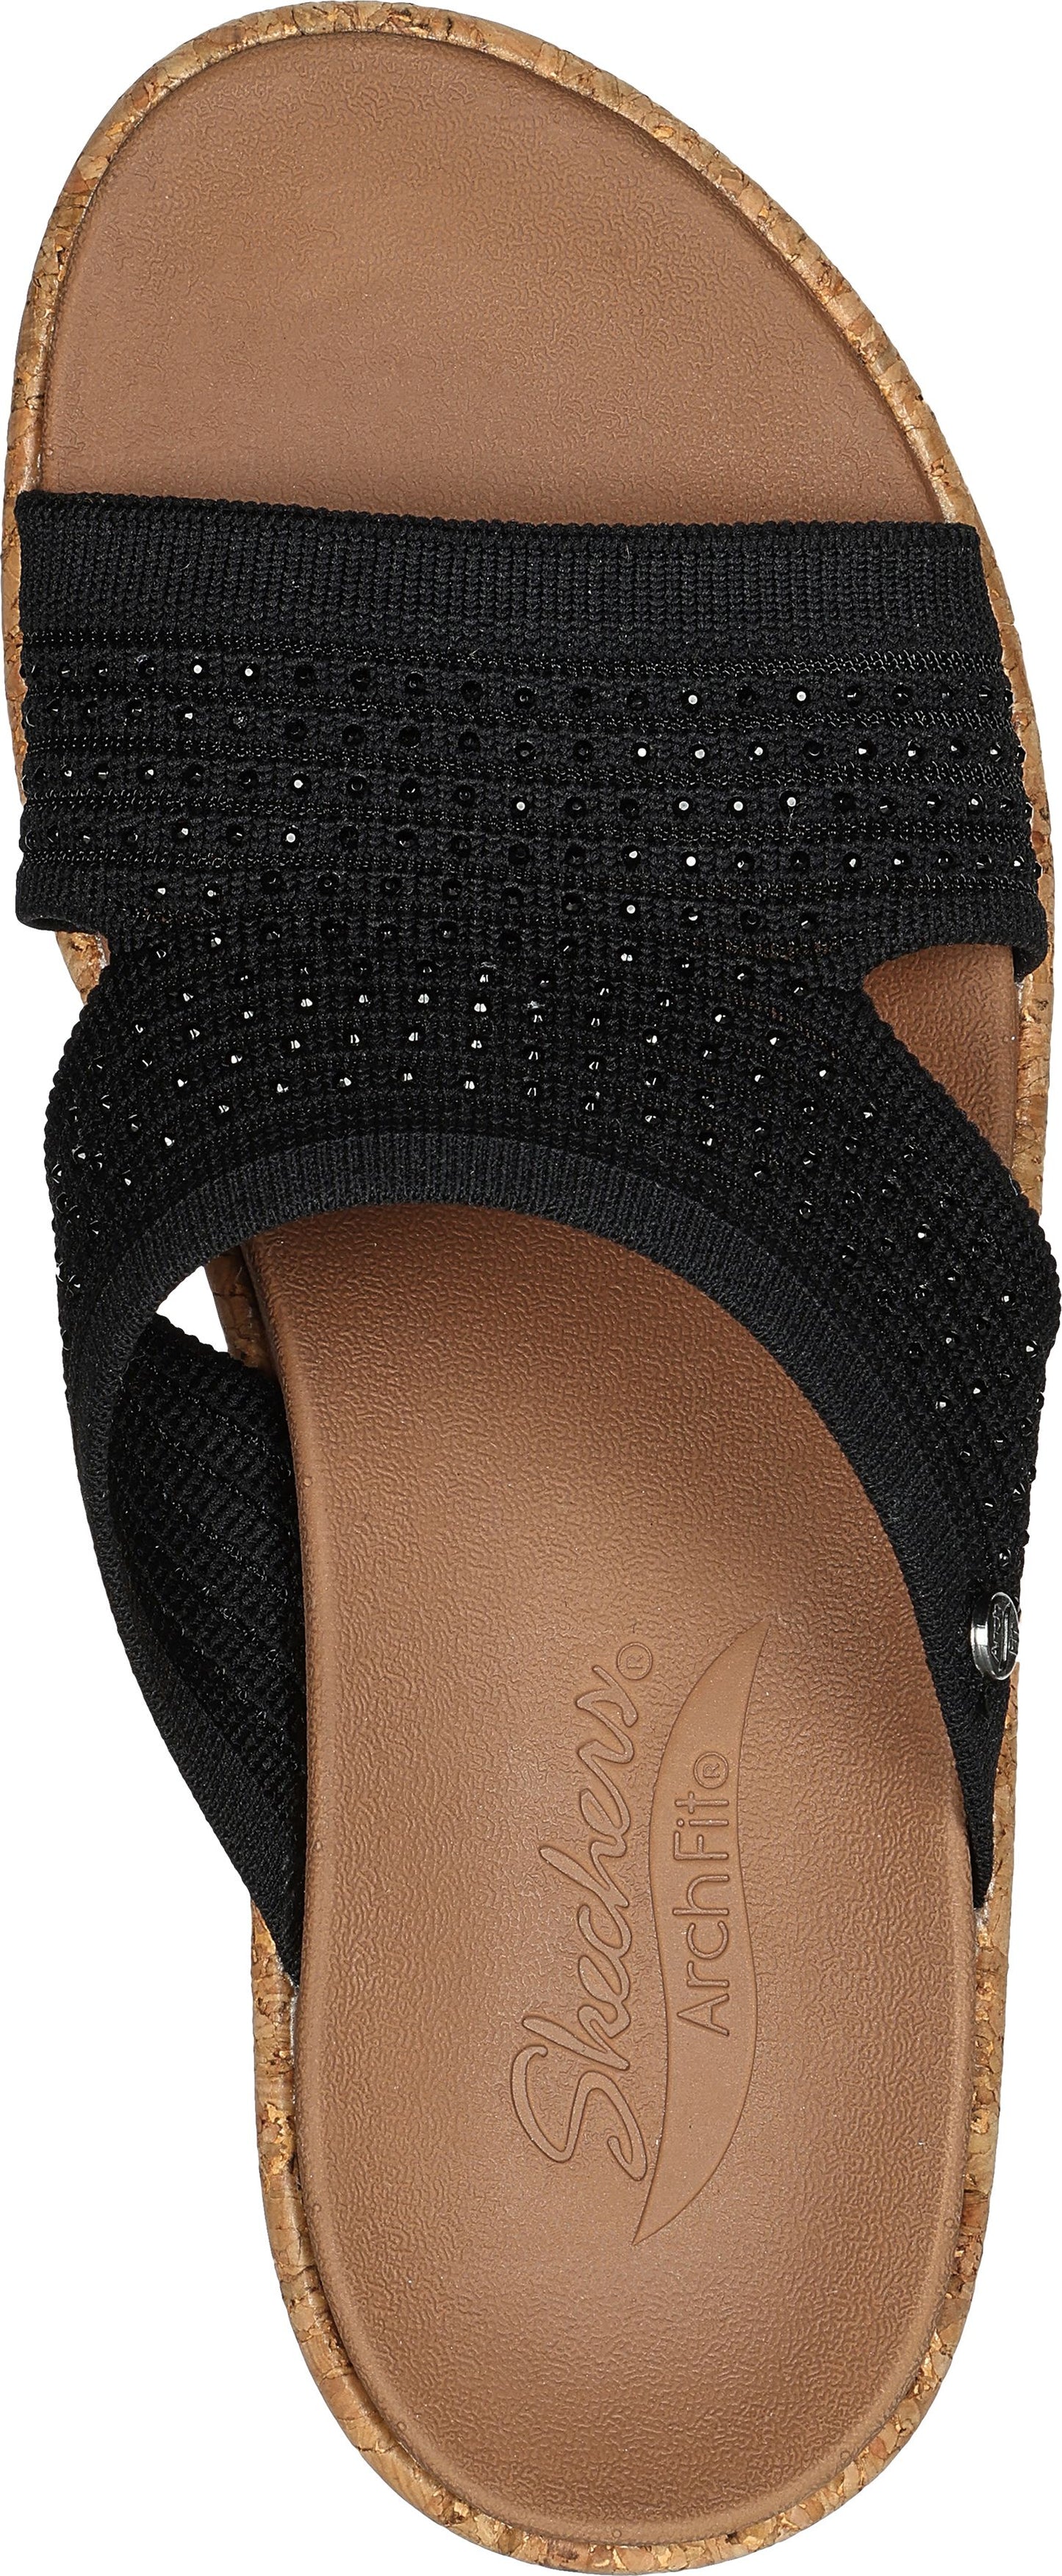 Skechers Sandals Arch Fit Beverlee Sweet Lacey Black